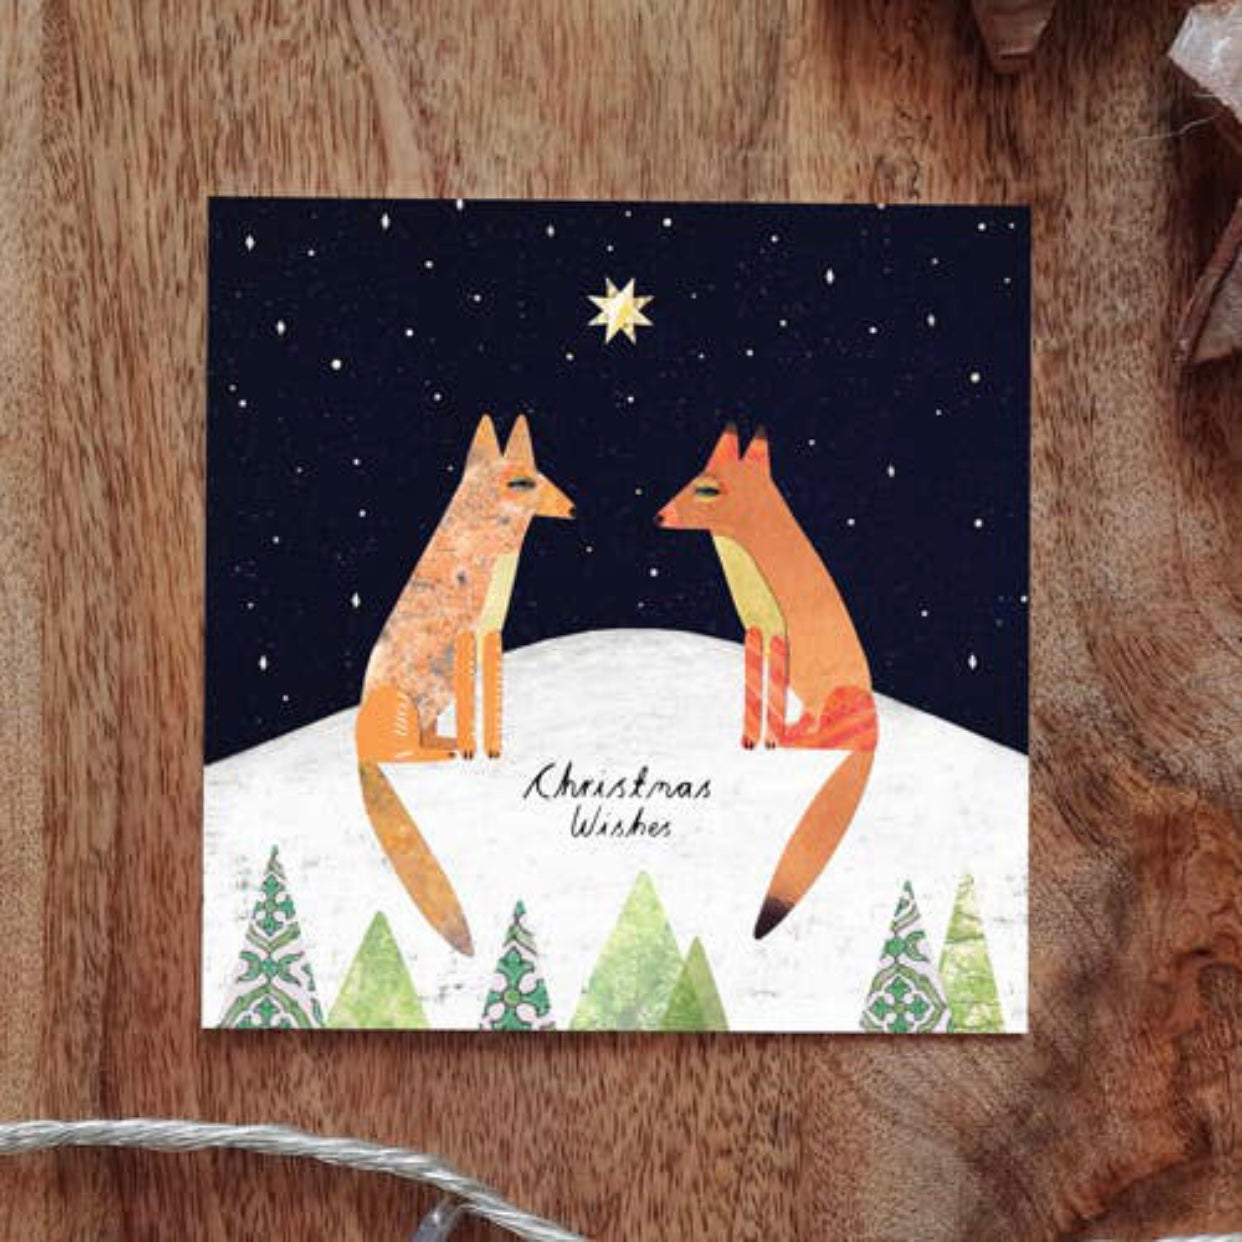 Christmas wishes greeting card